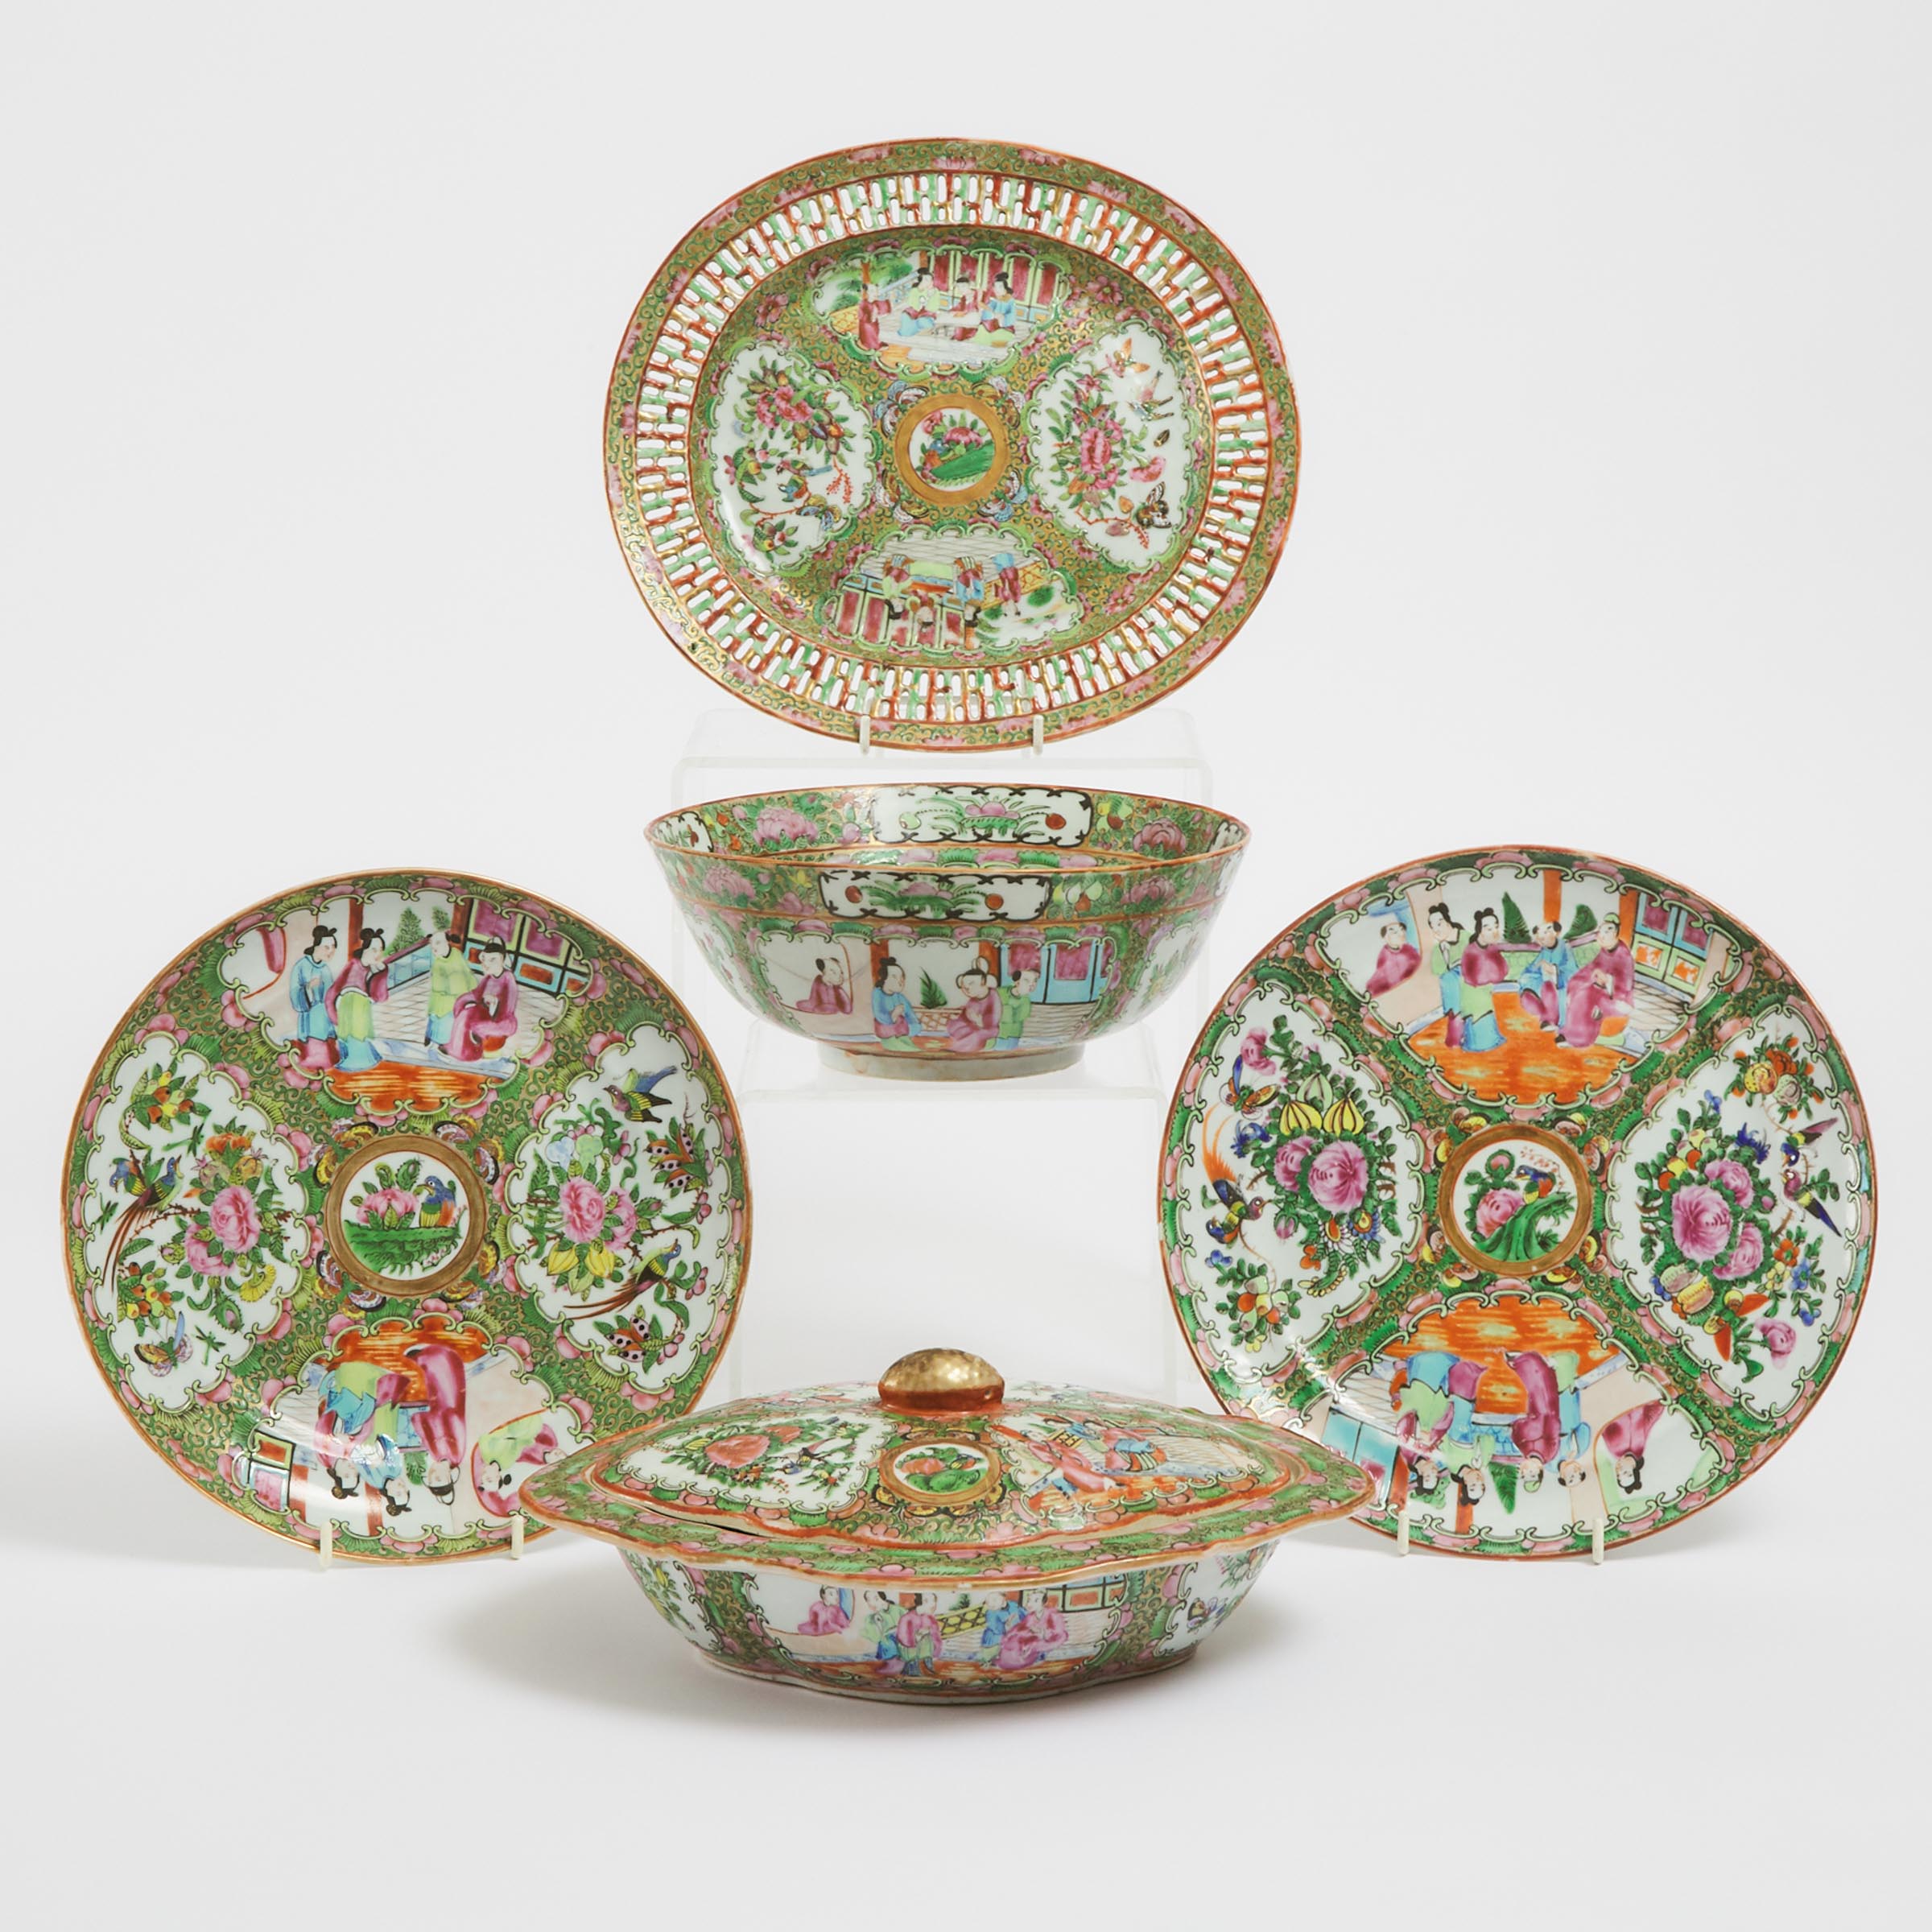 A Group of Five Chinese Export Canton Famille Rose Dinner Wares, 19th Century